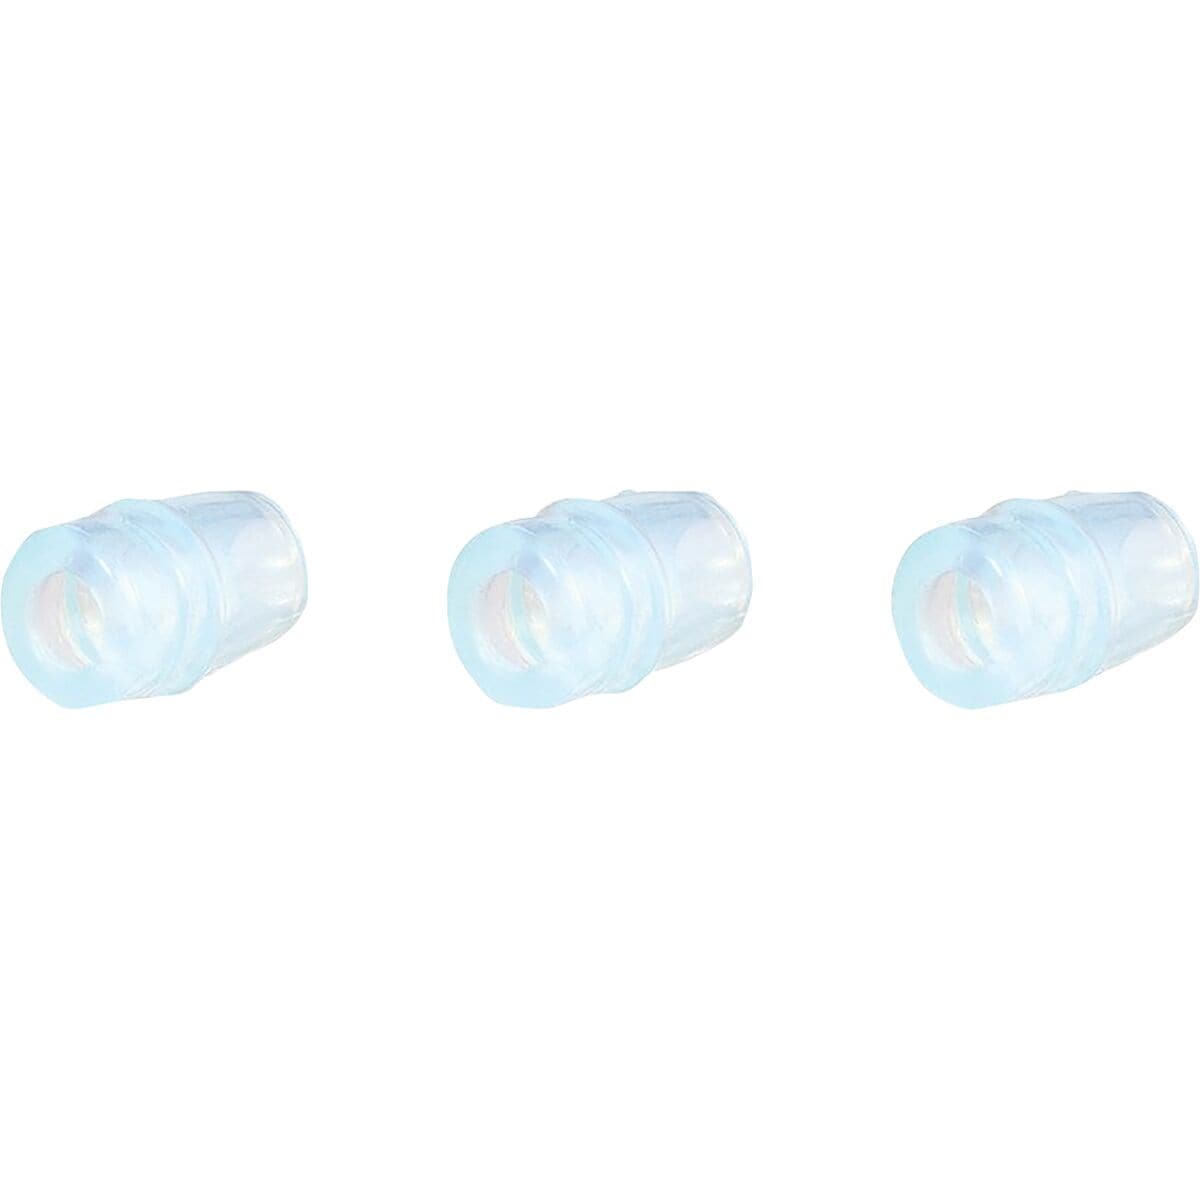 Osprey Packs Hydraulics Silicone Nozzle - 3-Pack One Color, One Size